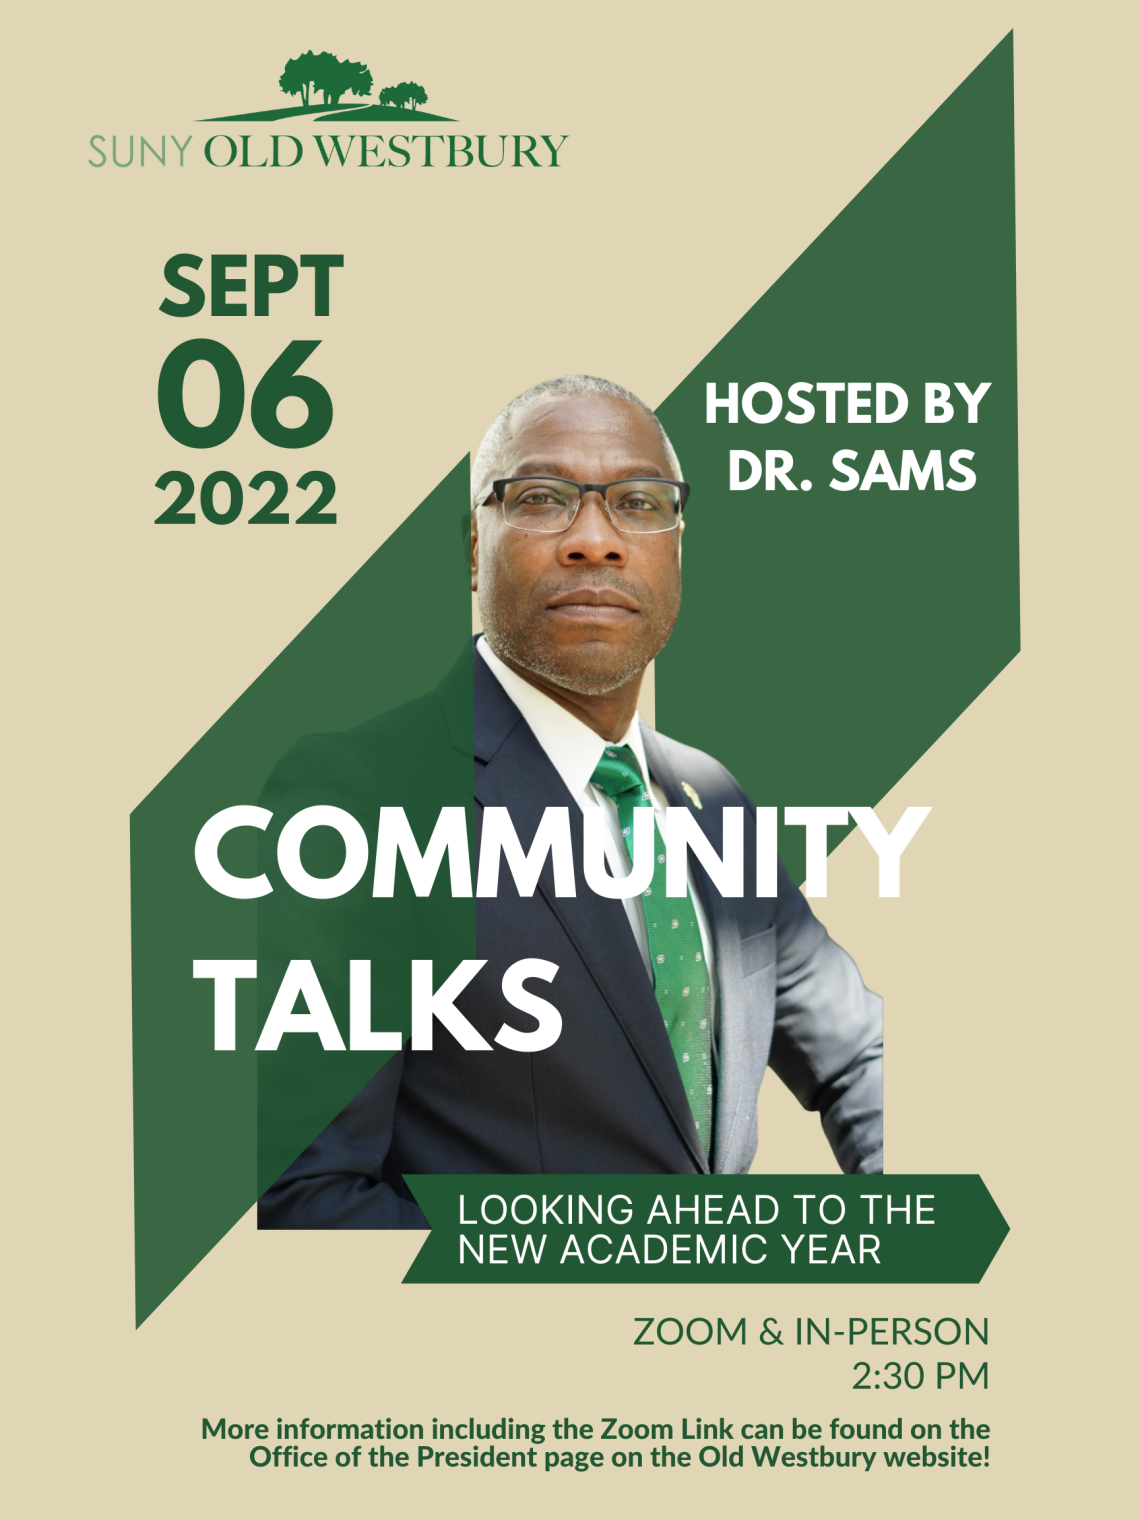 Community Talk with President Sams on September 6, 2022 at 2:30 PM. The topic will be focusing on looking ahead to the new academic year and will be hosted in person in NAB 1100 and on Zoom. Zoom Link can be found above this image. 